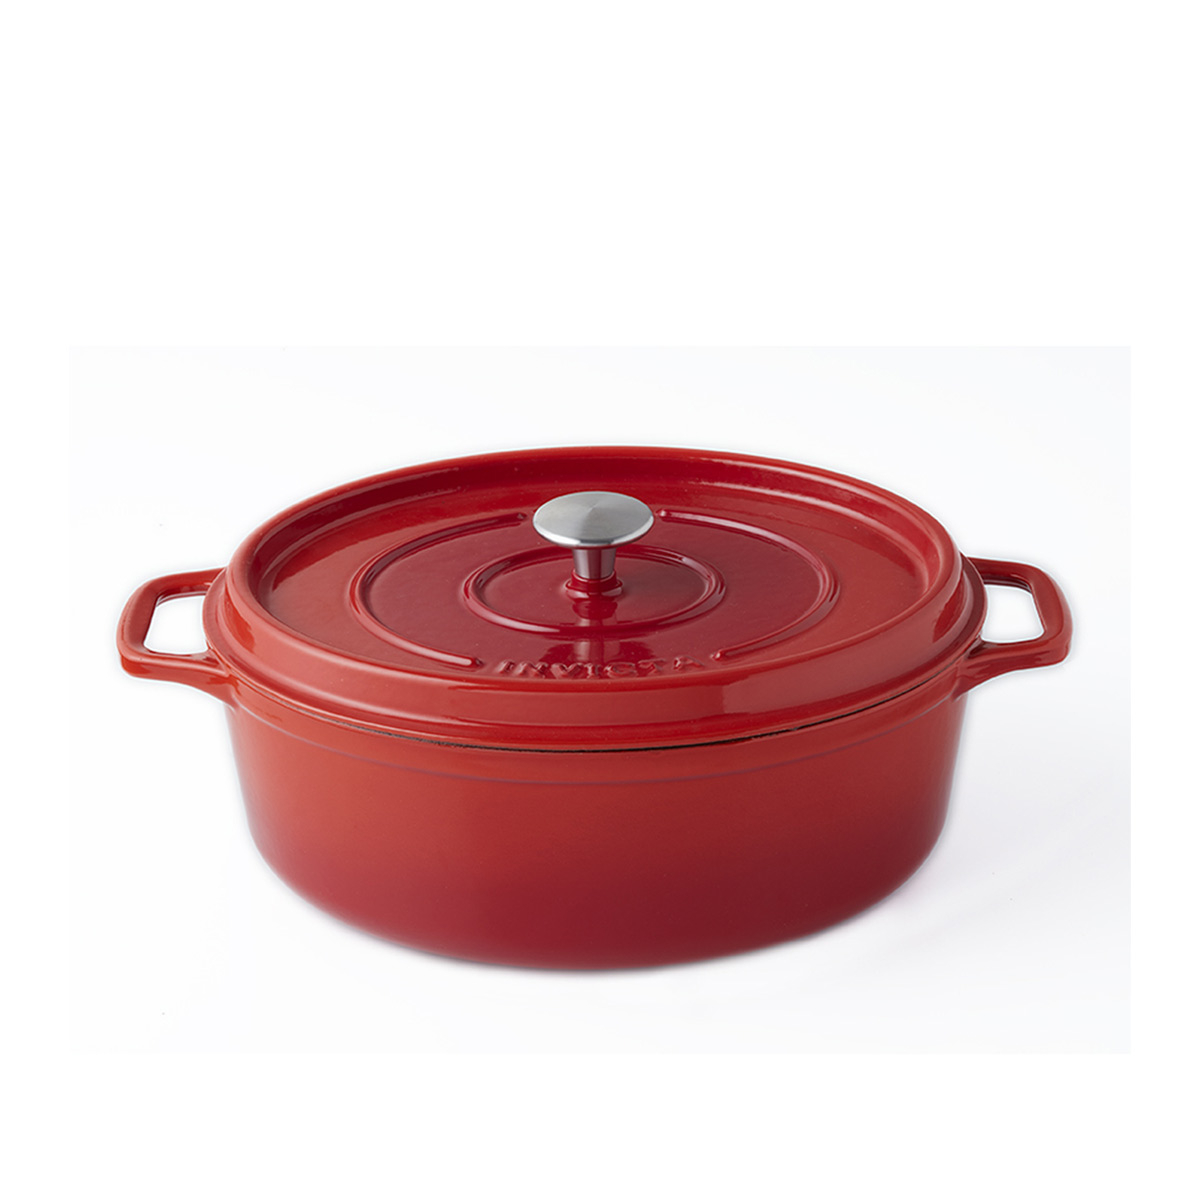 Invicta Cocotte oval 29 cm / 5 L - Gusseisen rot